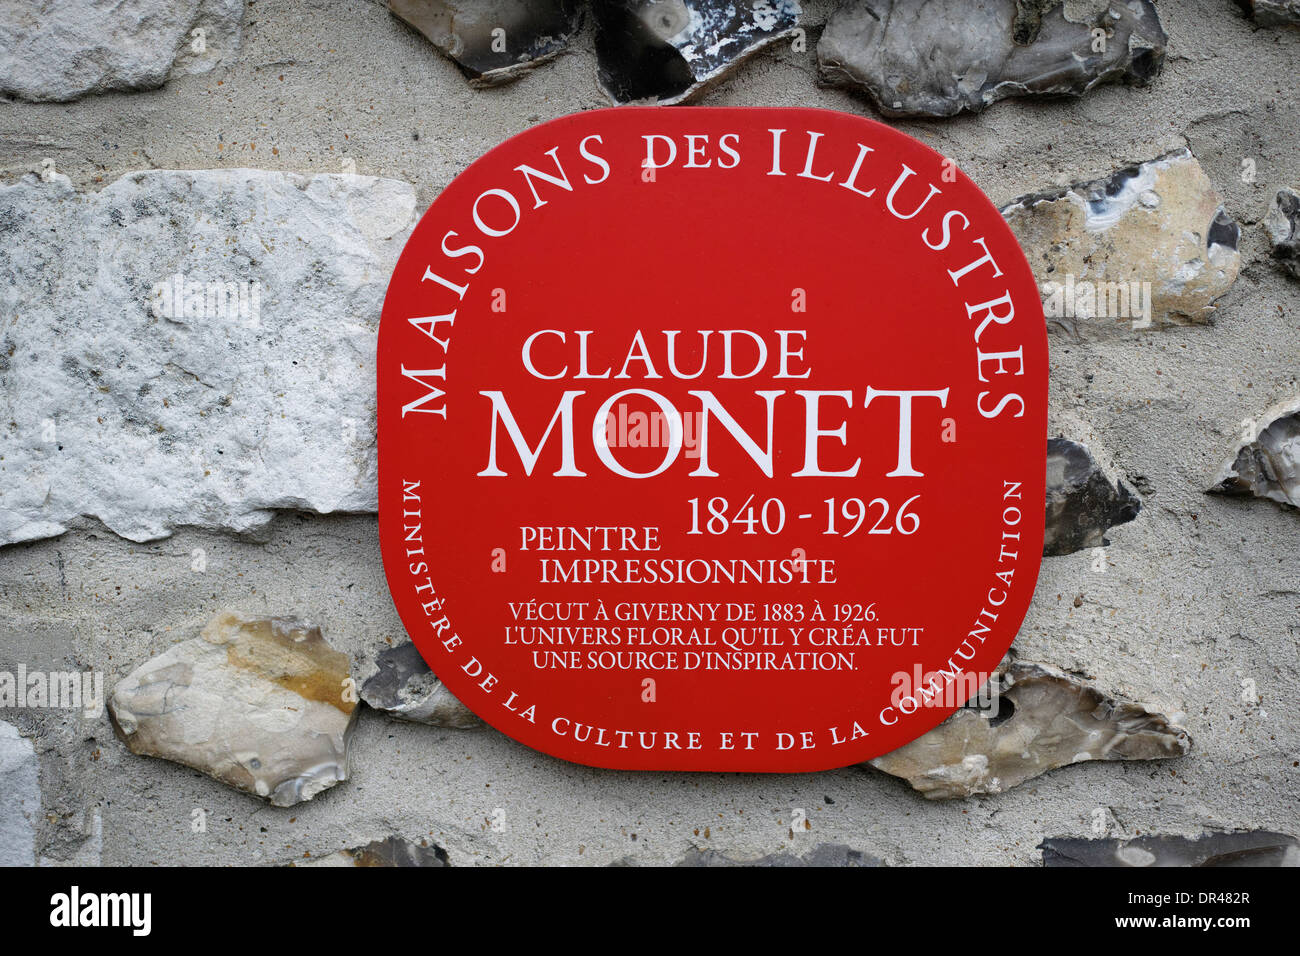 'Maisons des Illustres' label (introduced 2011) at the home of Monet, Giverny, France Stock Photo